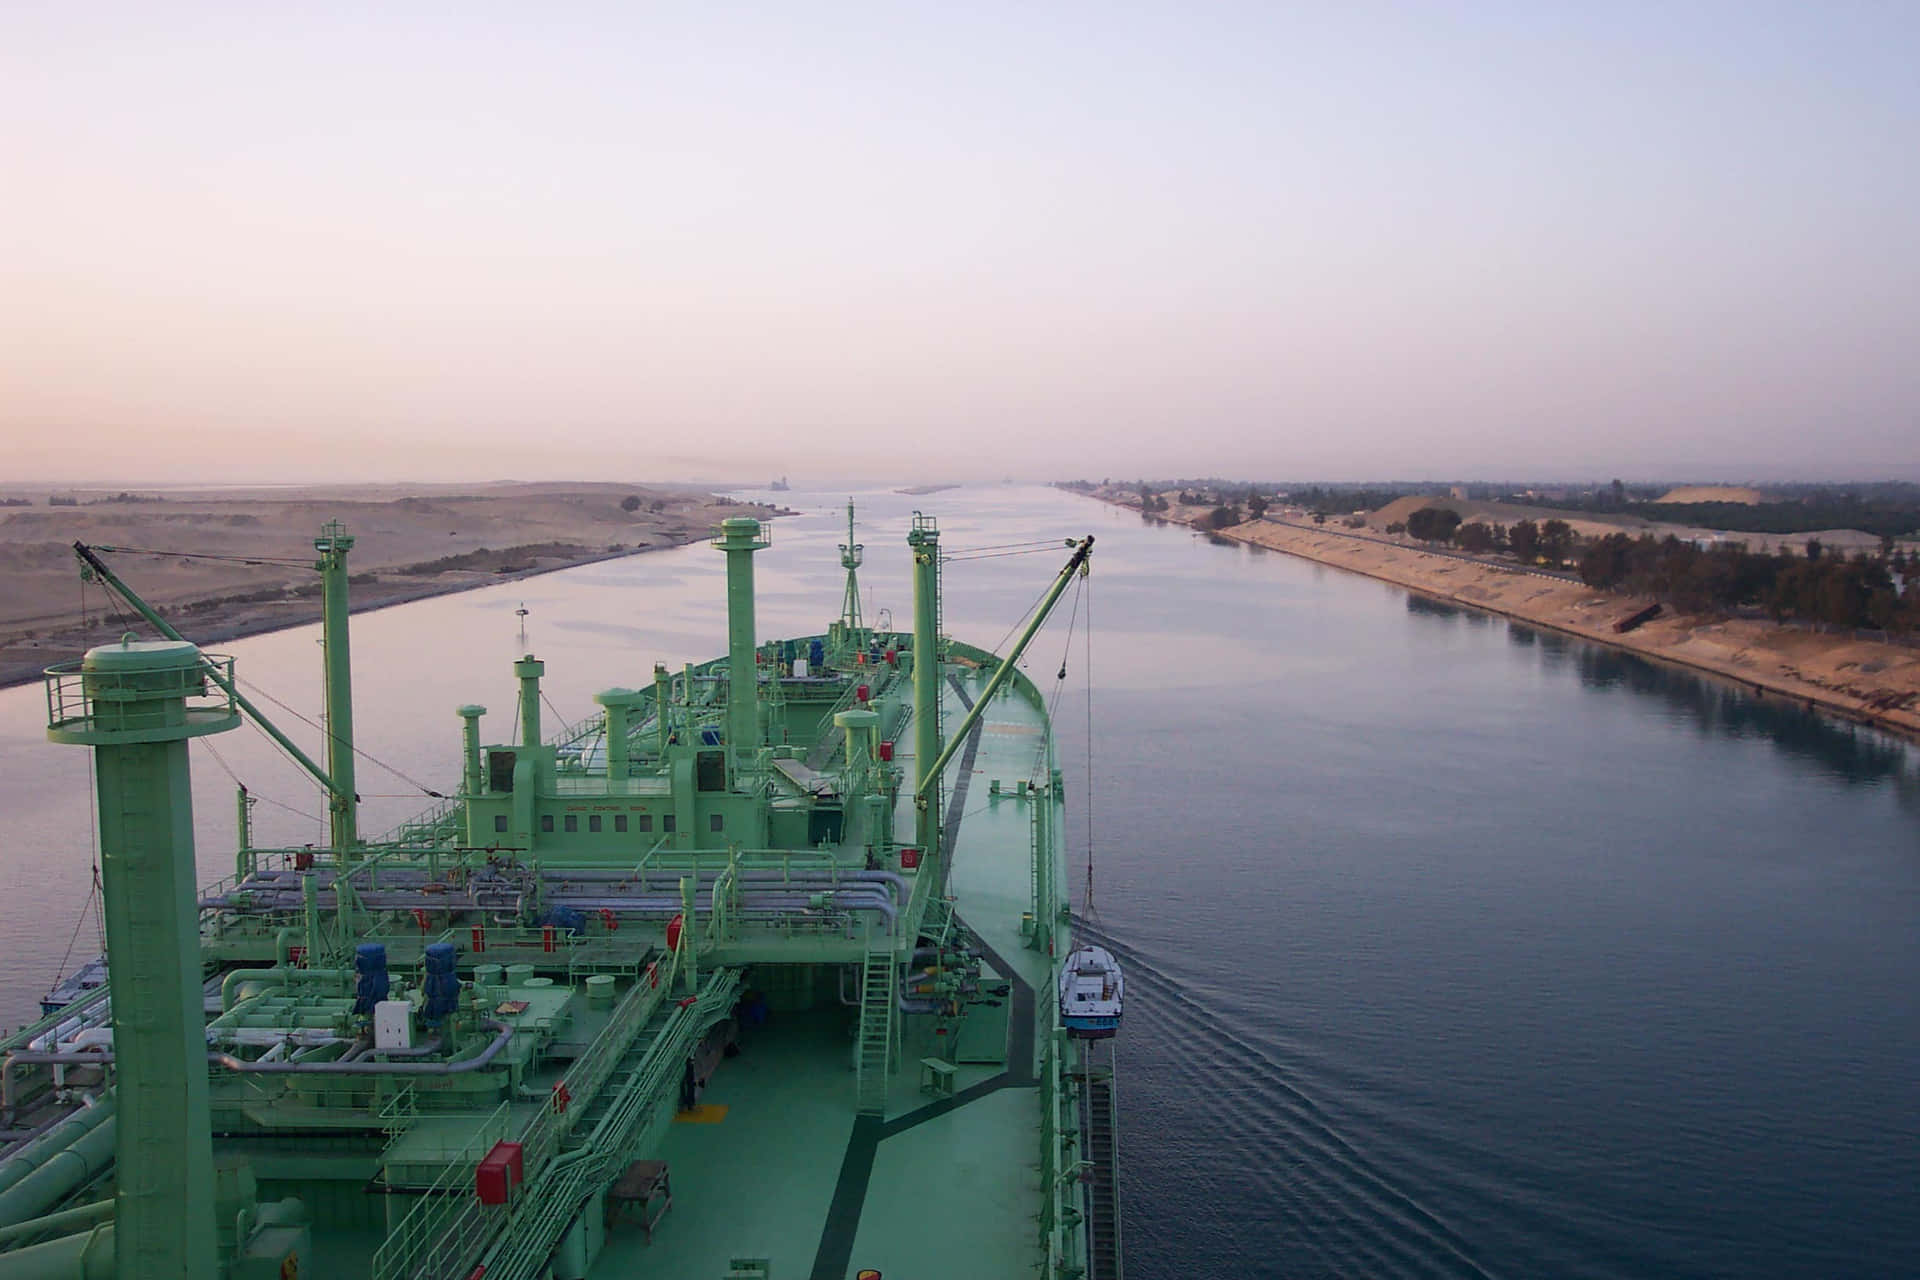 Cruising down the picturesque Suez Canal